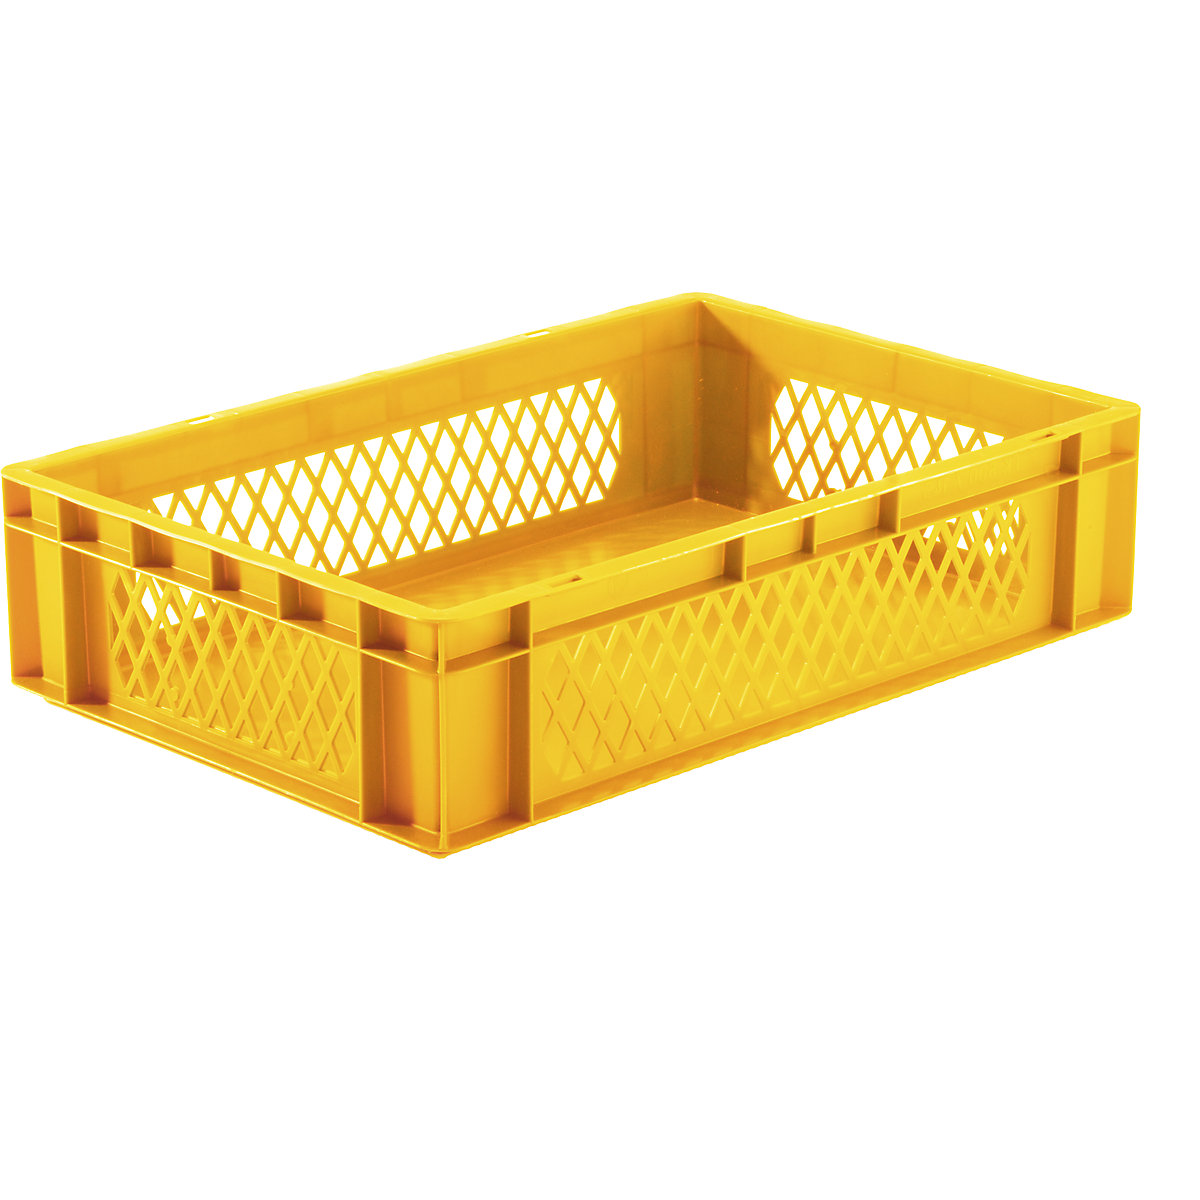 Euro stacking container, perforated walls, closed base, LxWxH 600 x 400 x 145 mm, yellow, pack of 5-7